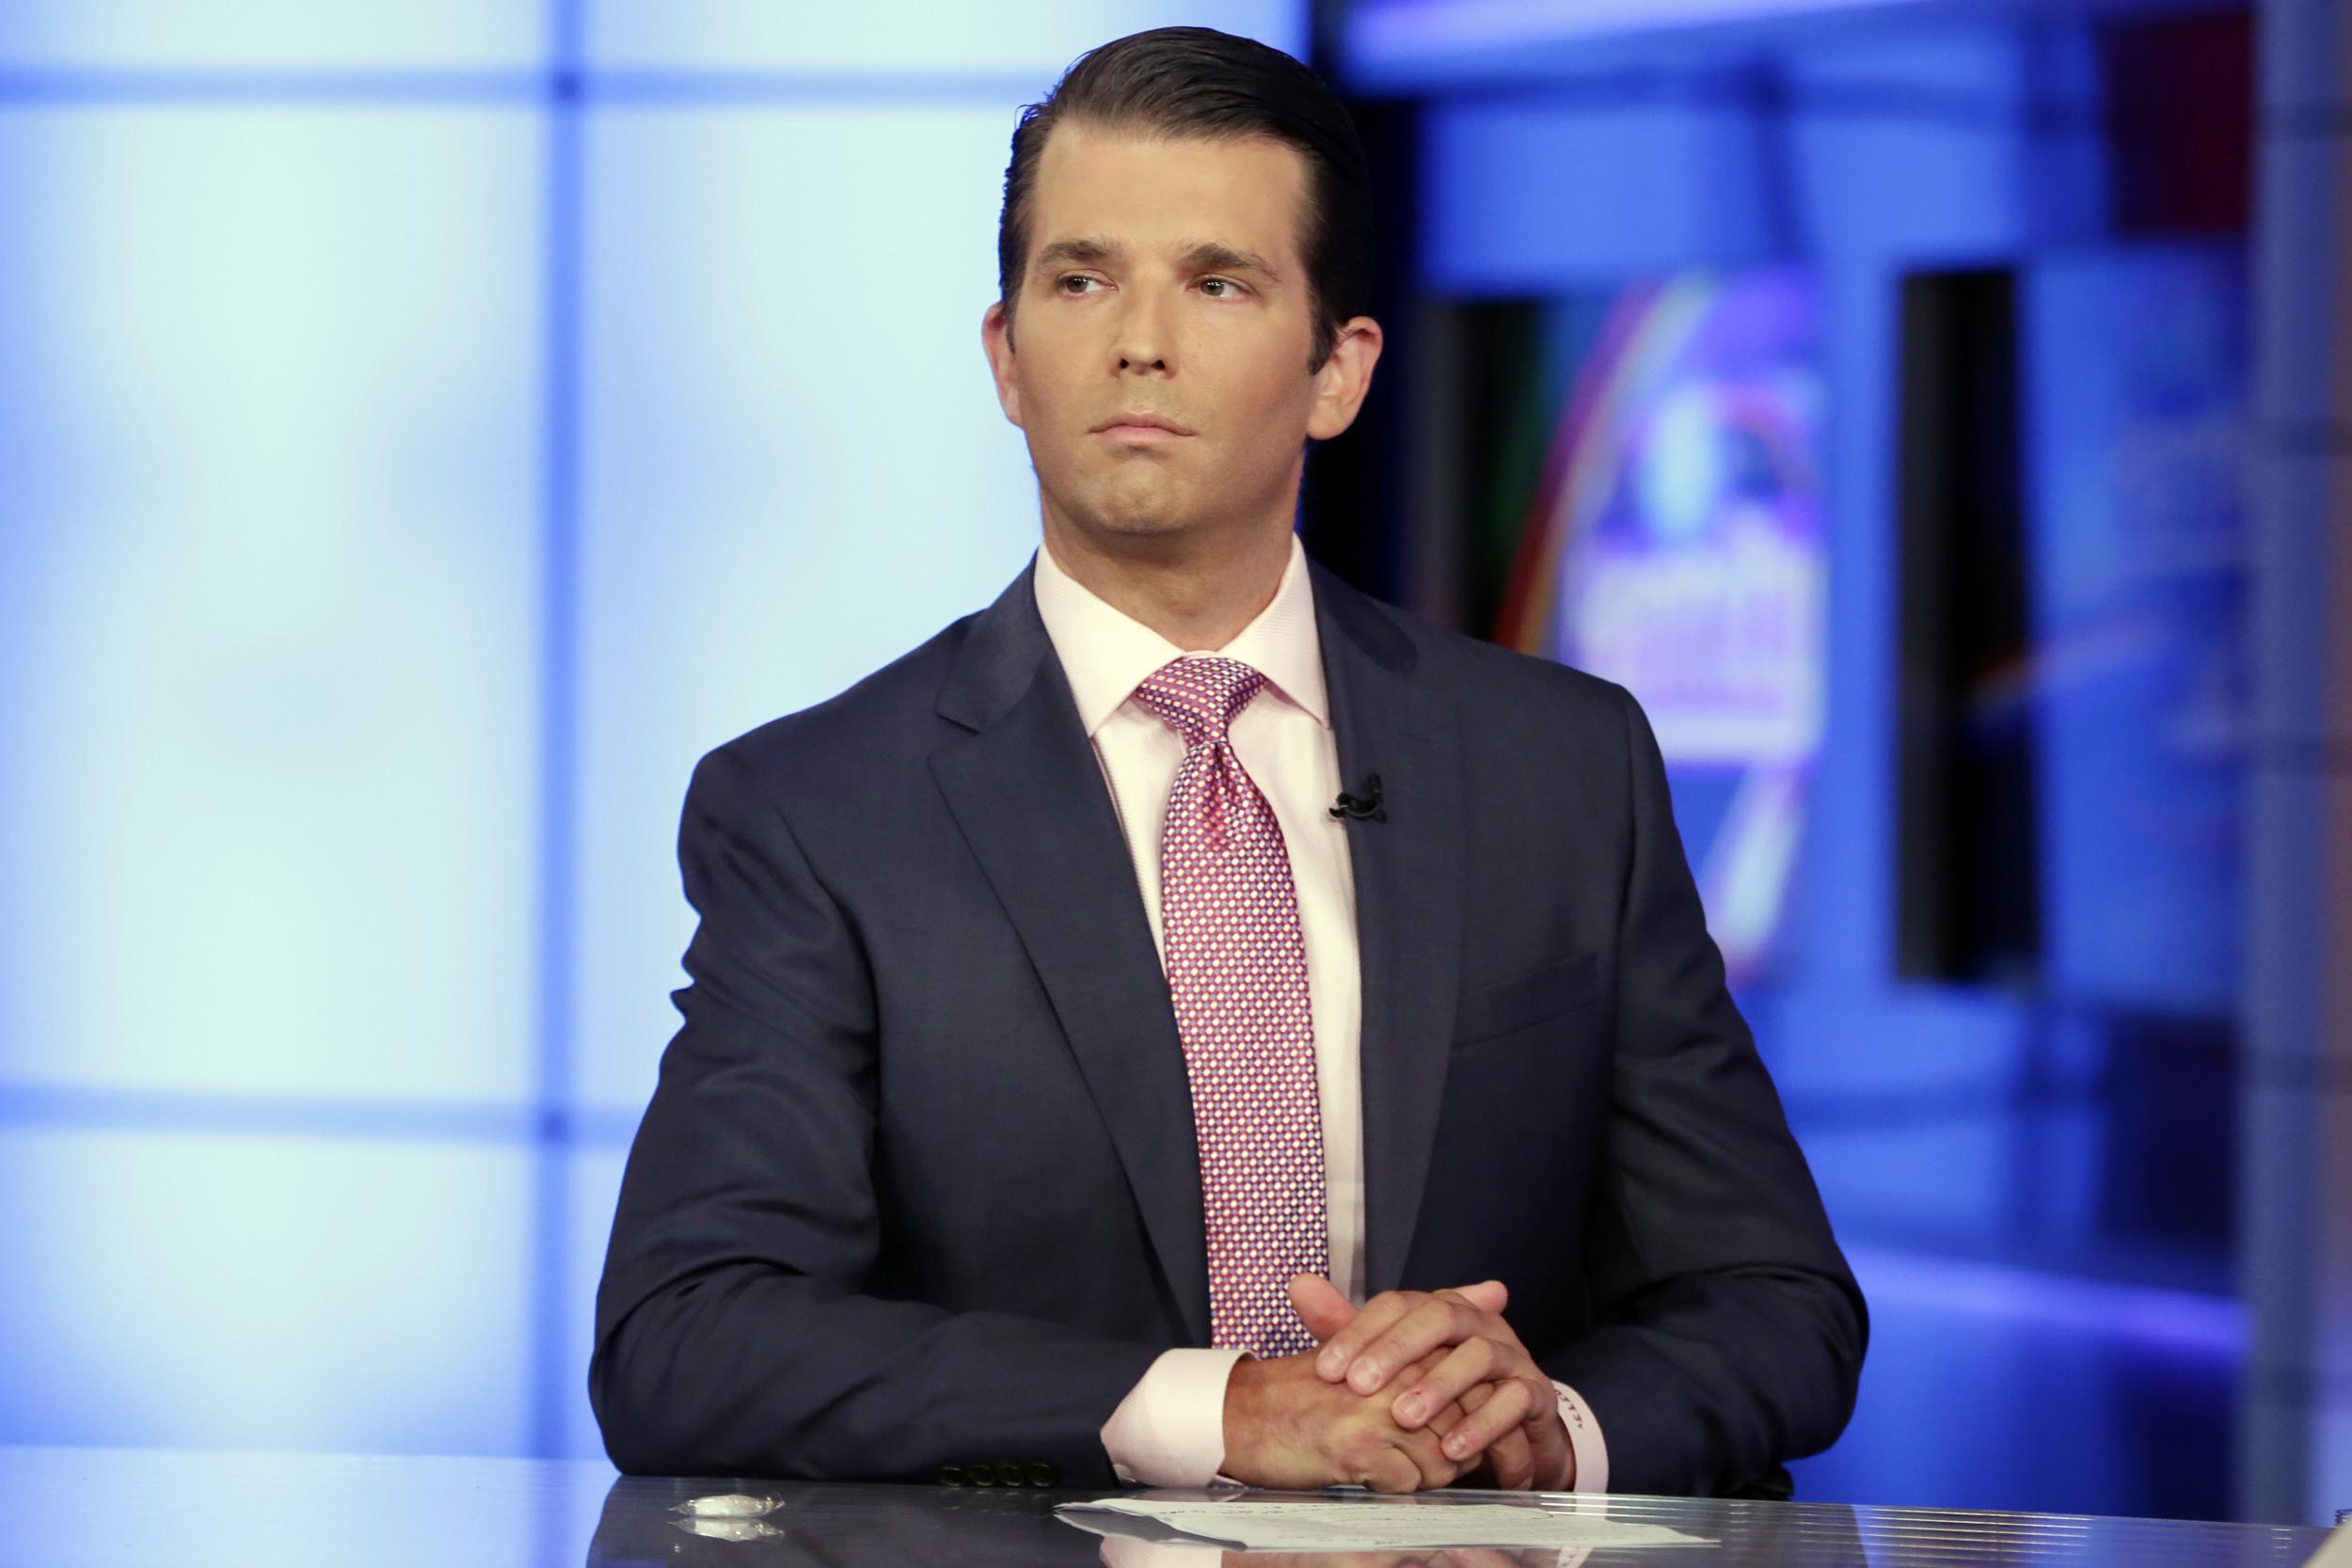 Trump Jr has made a number of Twitter blunders over the years